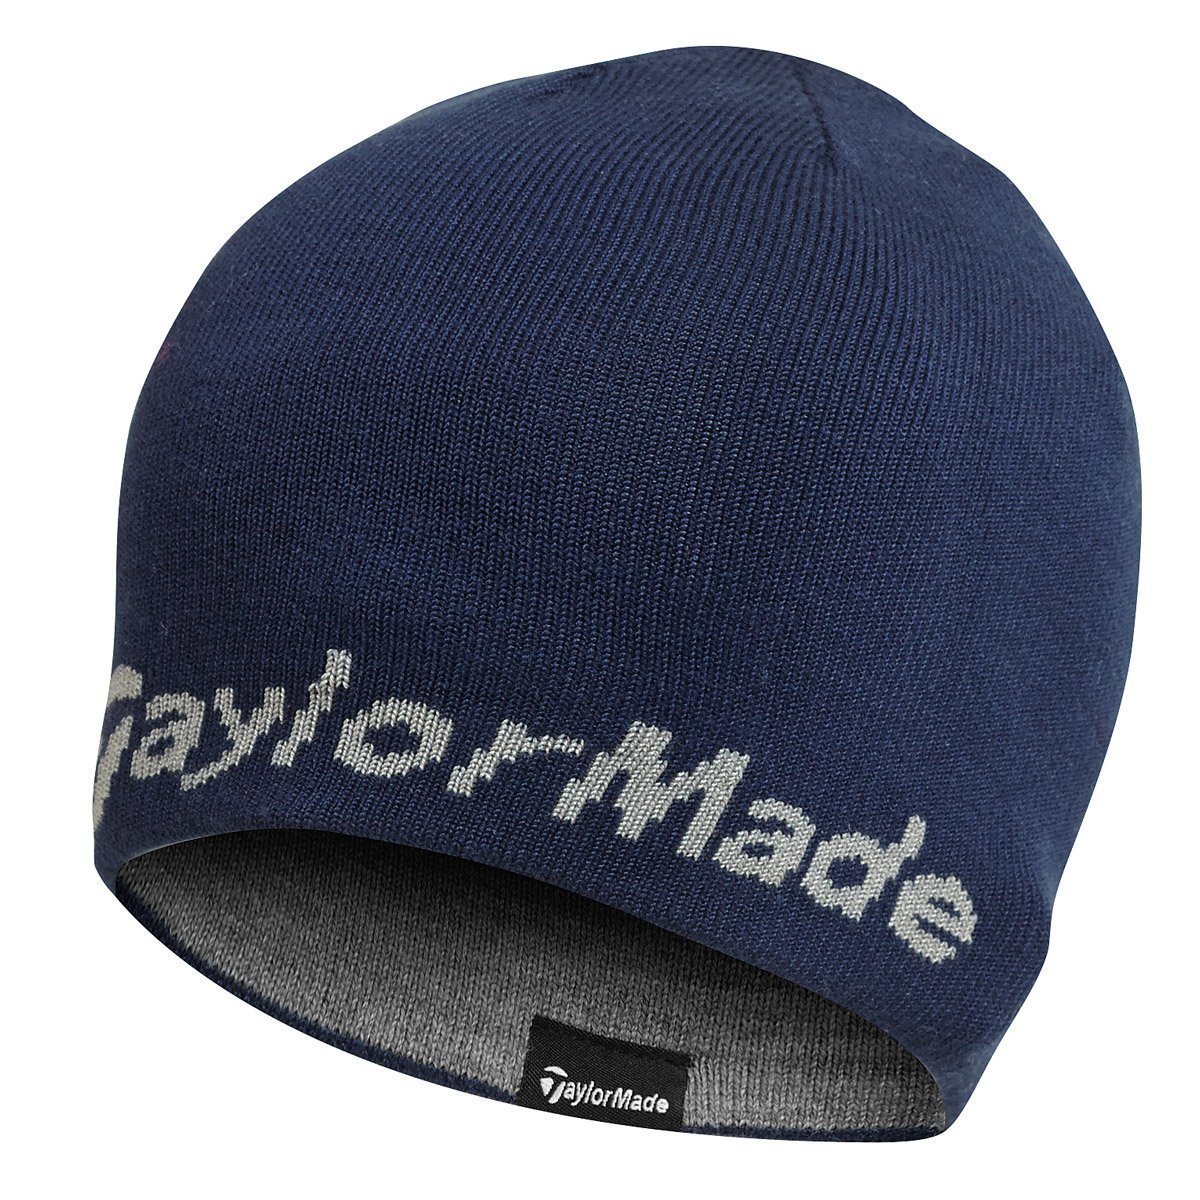 Taylormade Mens Reversible Thermal Golf Beanie Hats